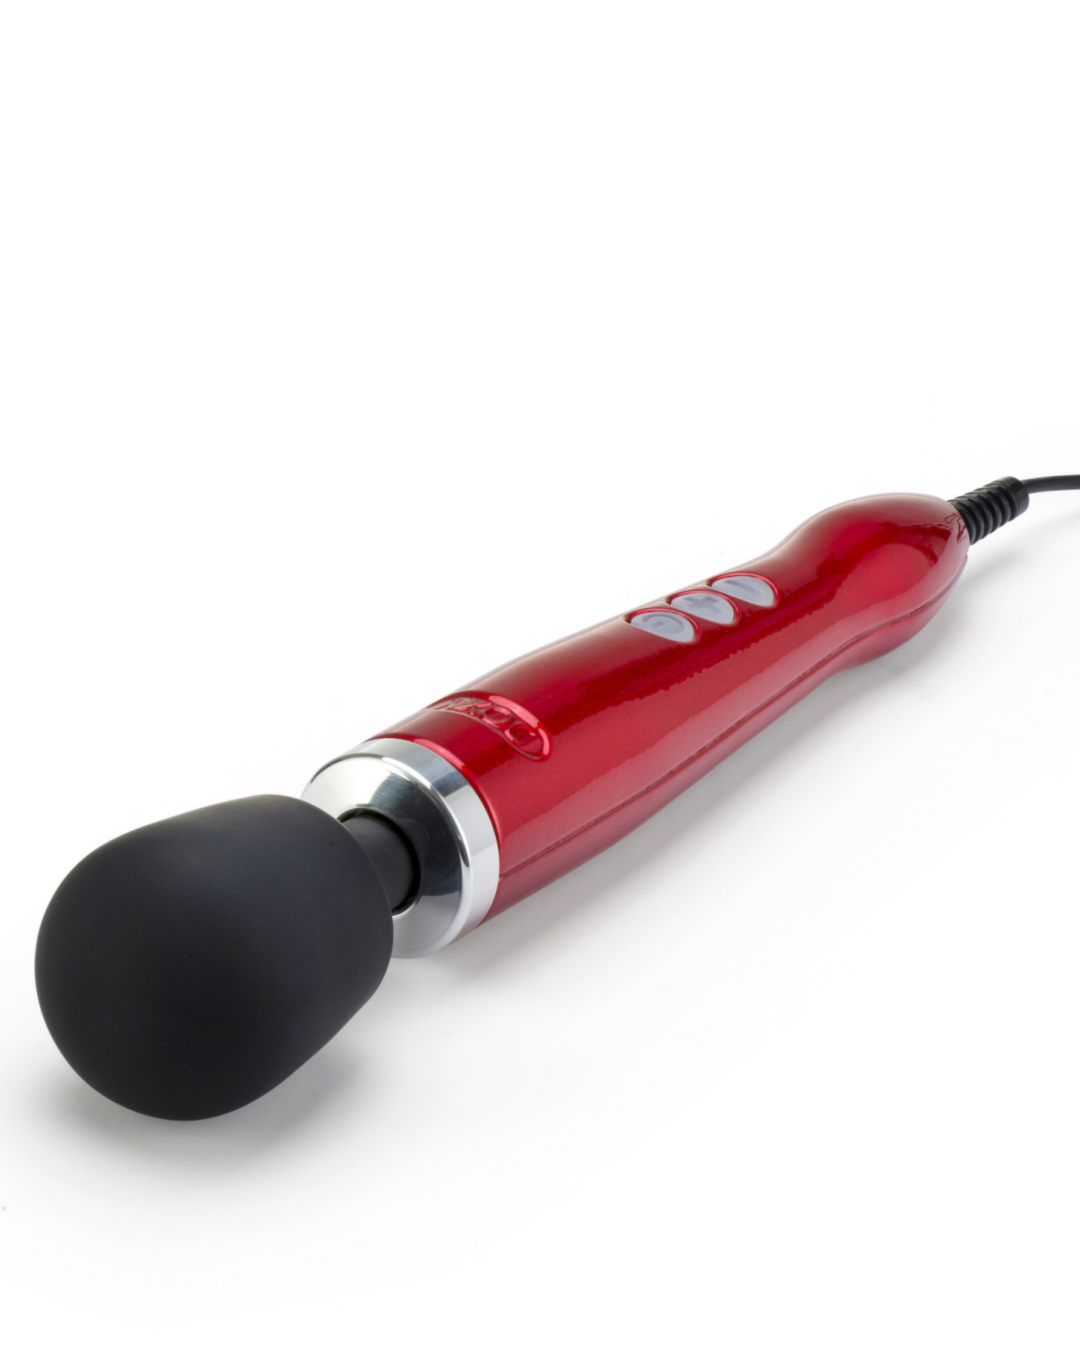 Doxy Die Cast Extra Powerful Massage Wand Vibrator - Redl aying down from head to cord 